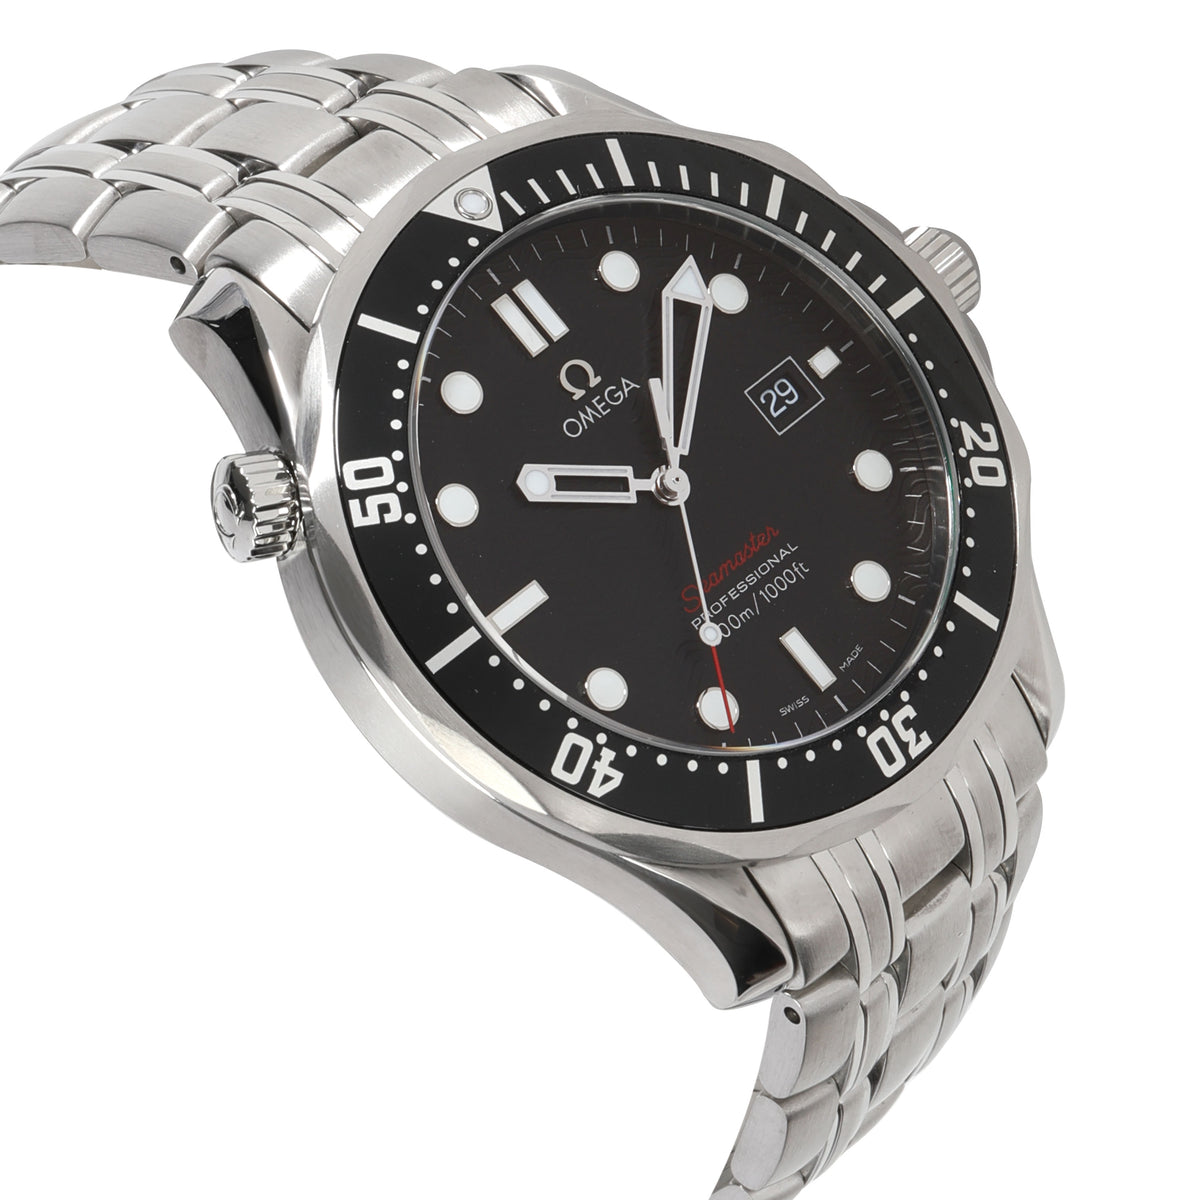 Omega Seamaster 300M 212.30.41.61.01.001 Men's Watch in  Stainless Steel